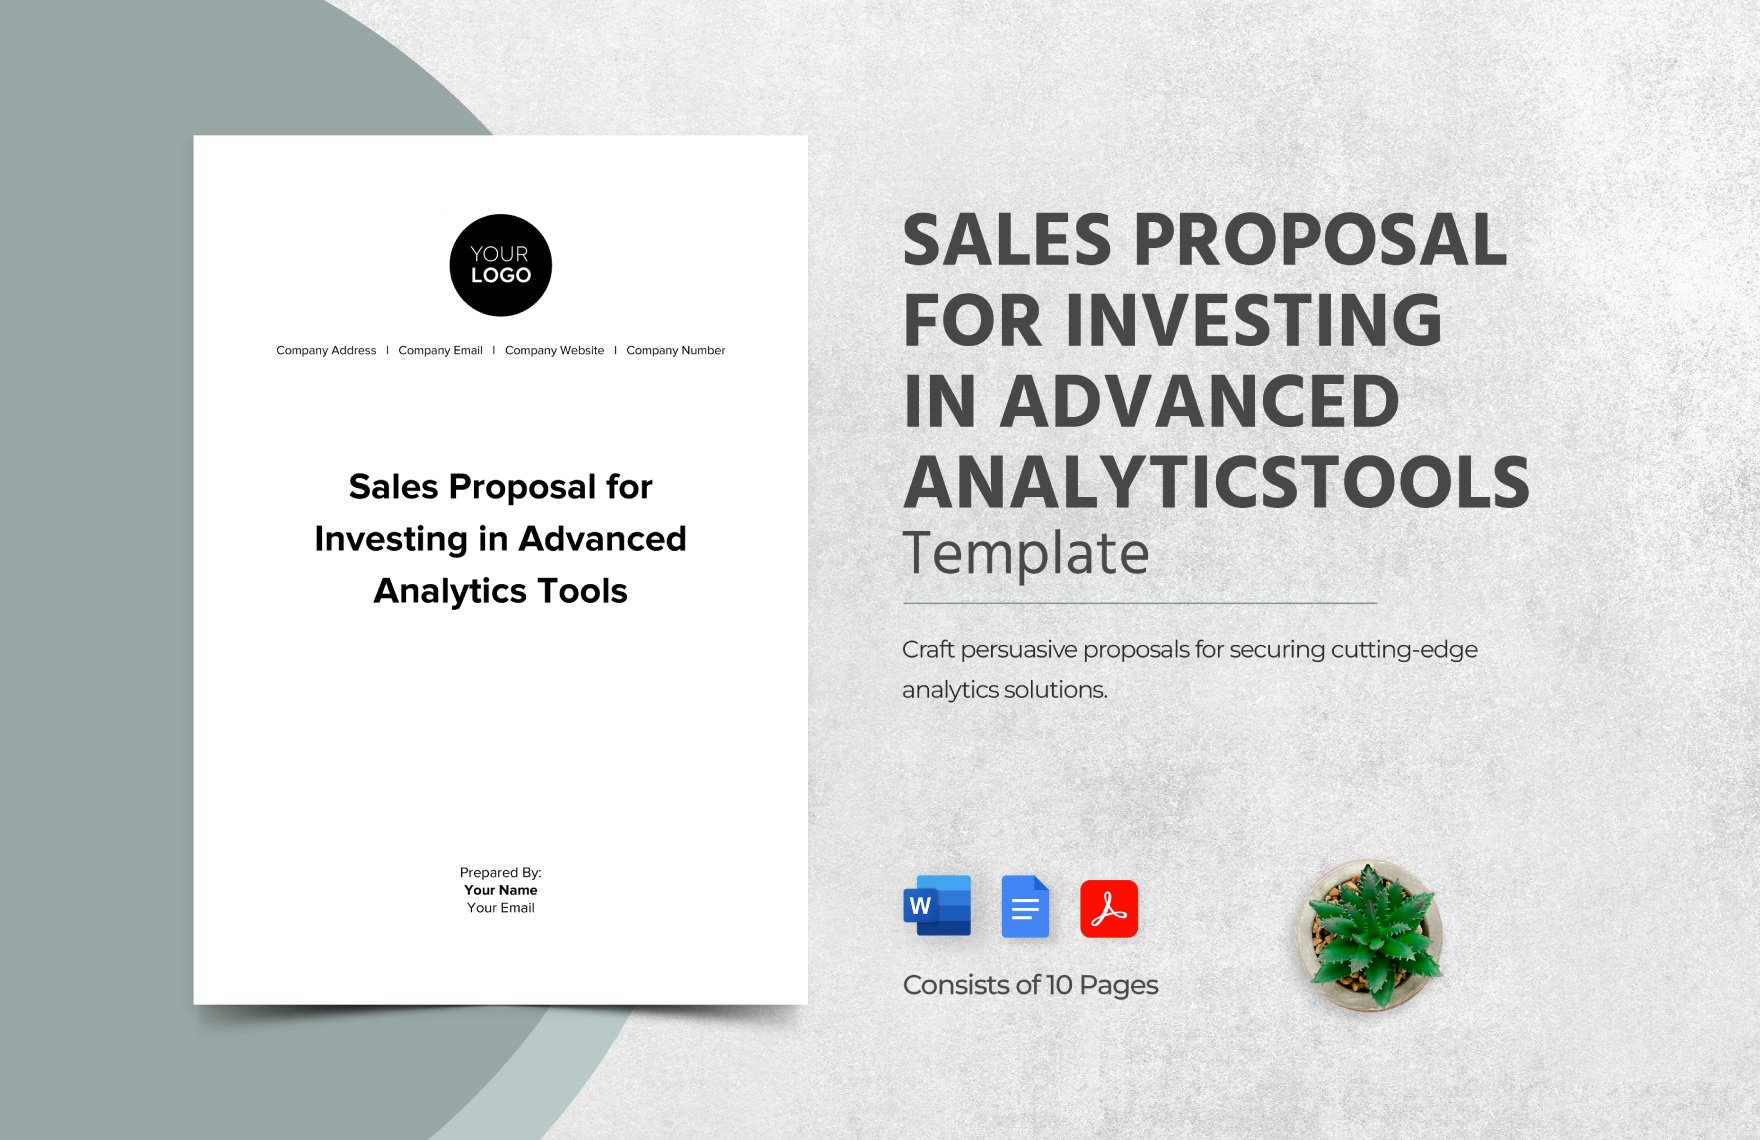 Sales Proposal for Investing in Advanced Analytics Tools Template